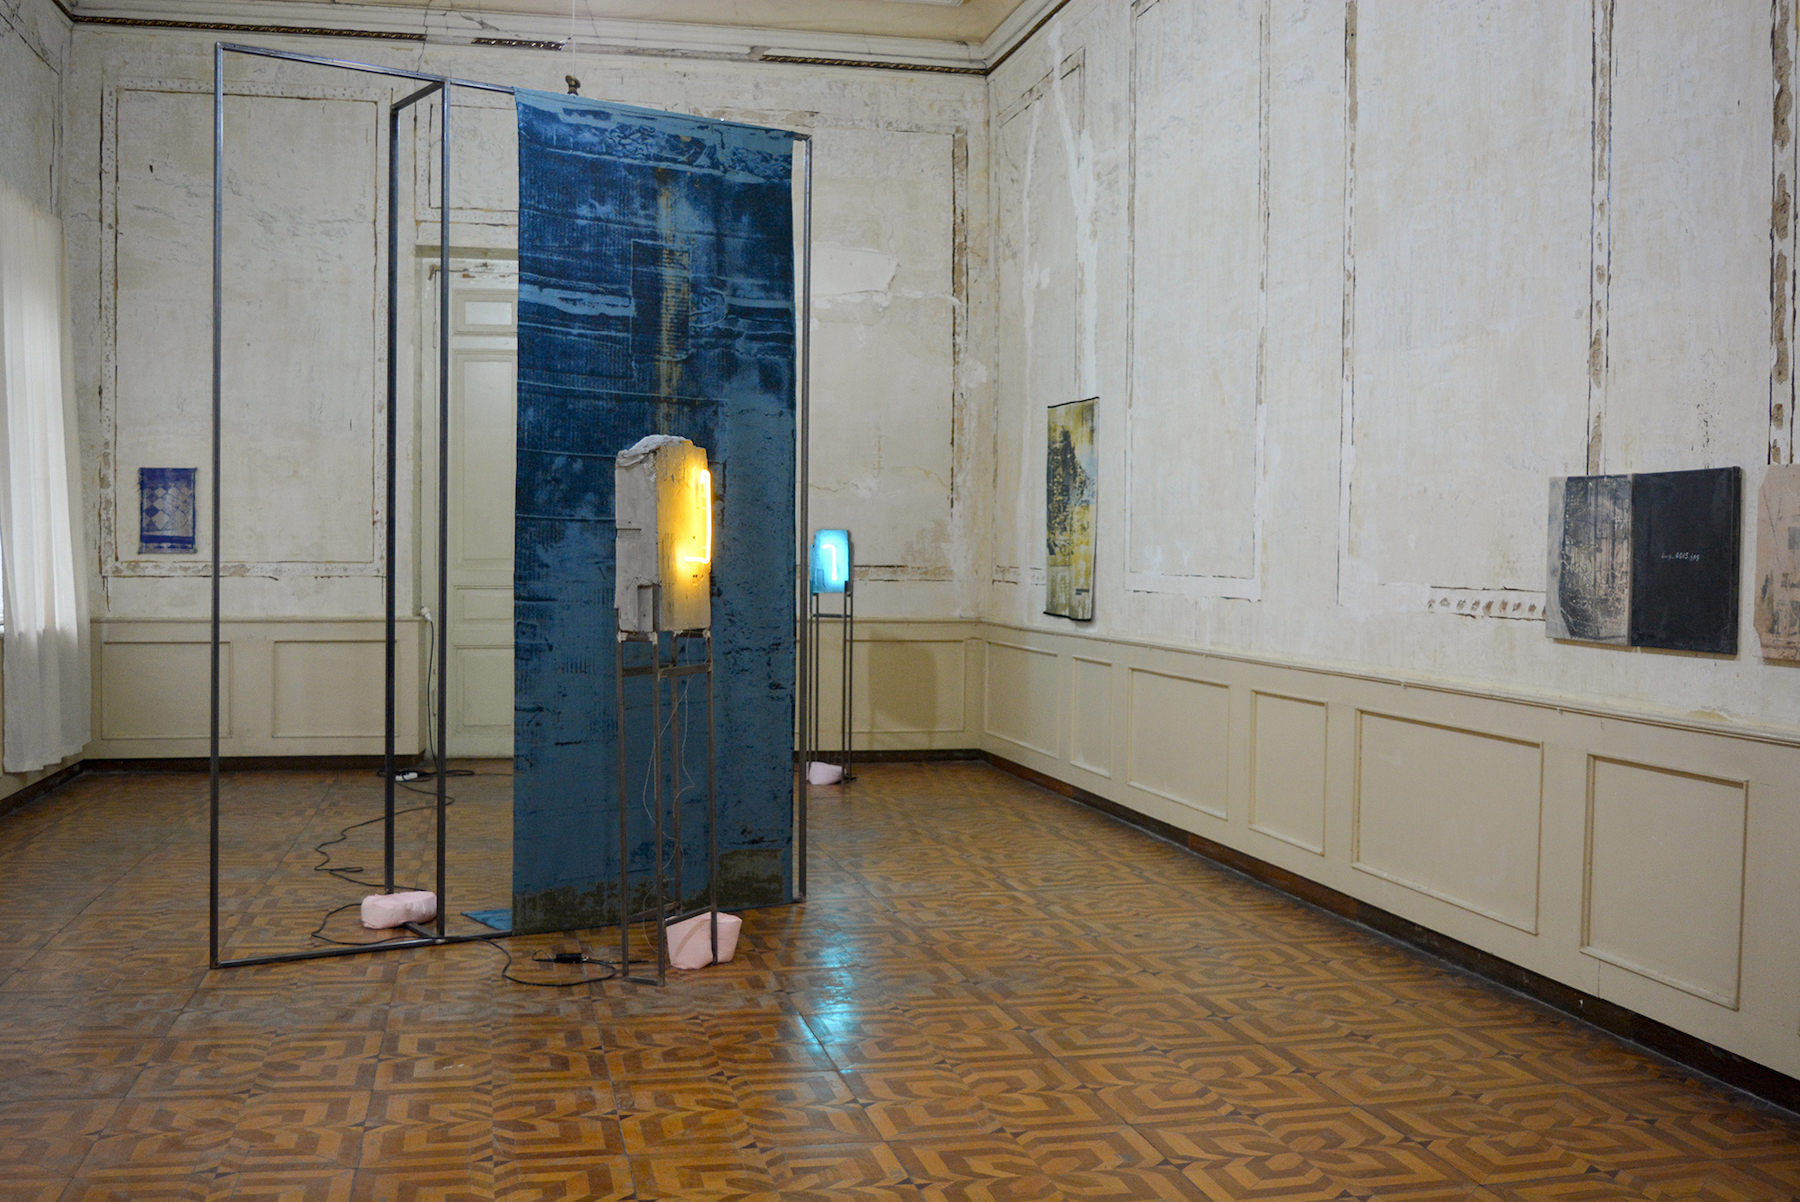 In Between, 2017, Steel, jacquard weaved tapestries, pigmented plaster, neon, acrylic on canvas, Dimensions variable.
Solo exhibition at Tbilisi Silk Museum, Georgia. Installation view. Image courtesy the artist and Tbilisi Silk Museum.
